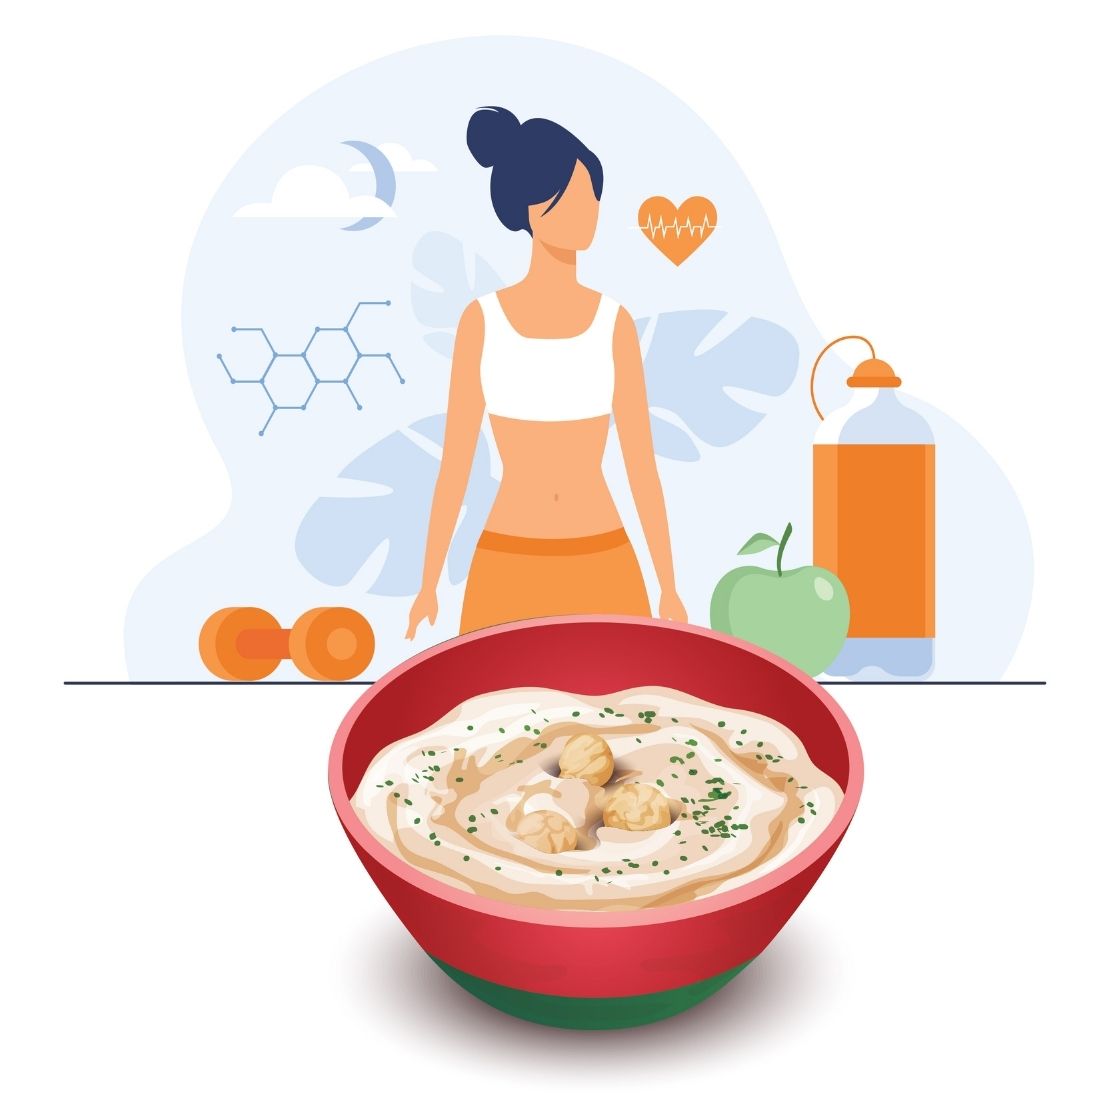 HUMMUS HELPS MAINTAIN A HEALTHY WEIGHT